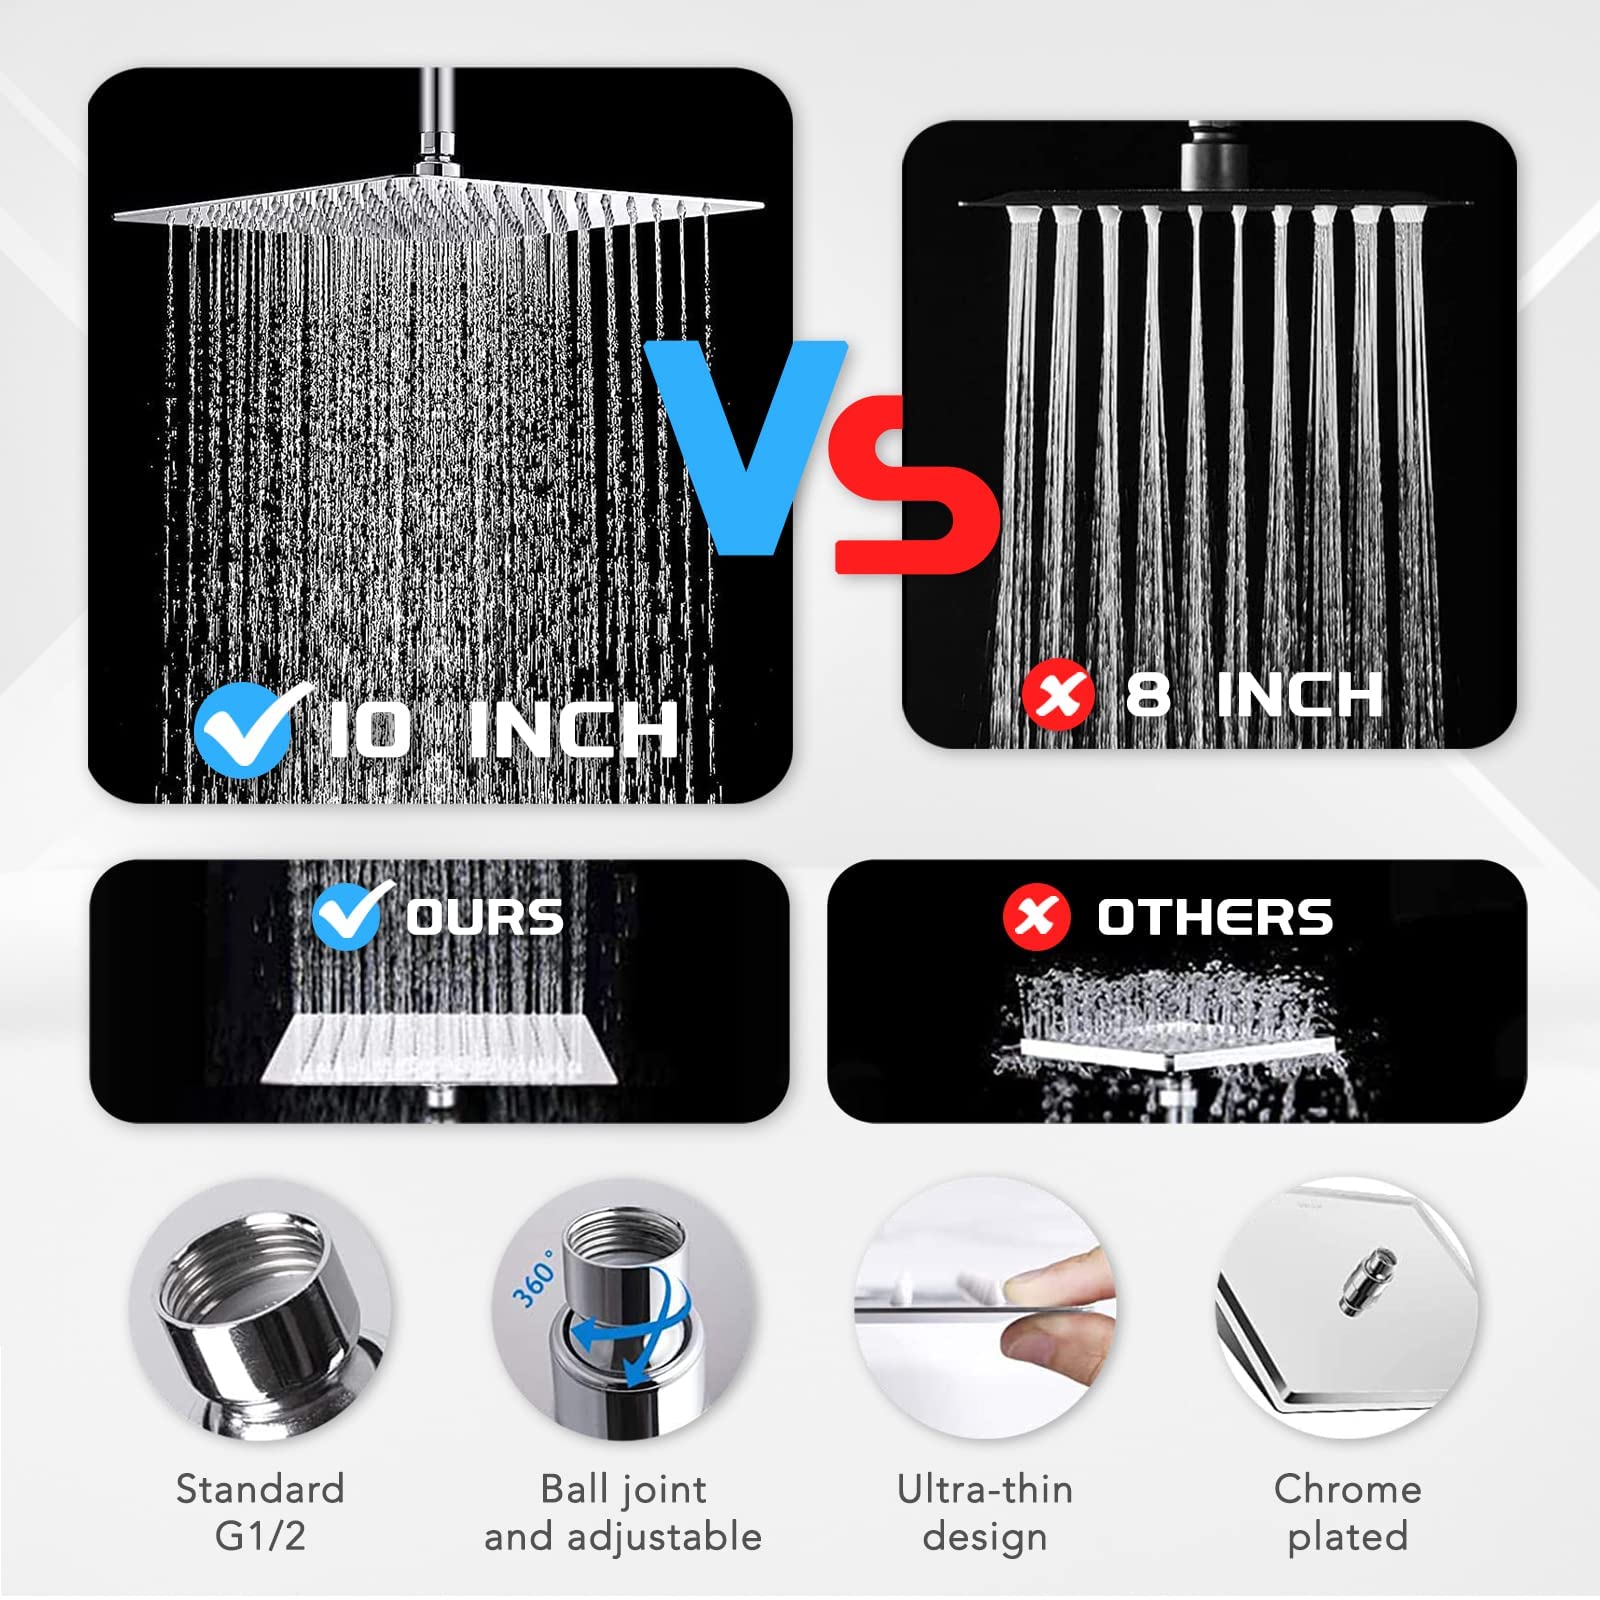 Razime 10''Rainfall Shower Head with Handheld Combo High Pressure 8+2 MODE built-in power wash, Stainless Steel Chrome Showerhead with 11'' Extension Arm Height/Angle Adjustable with Holder&60